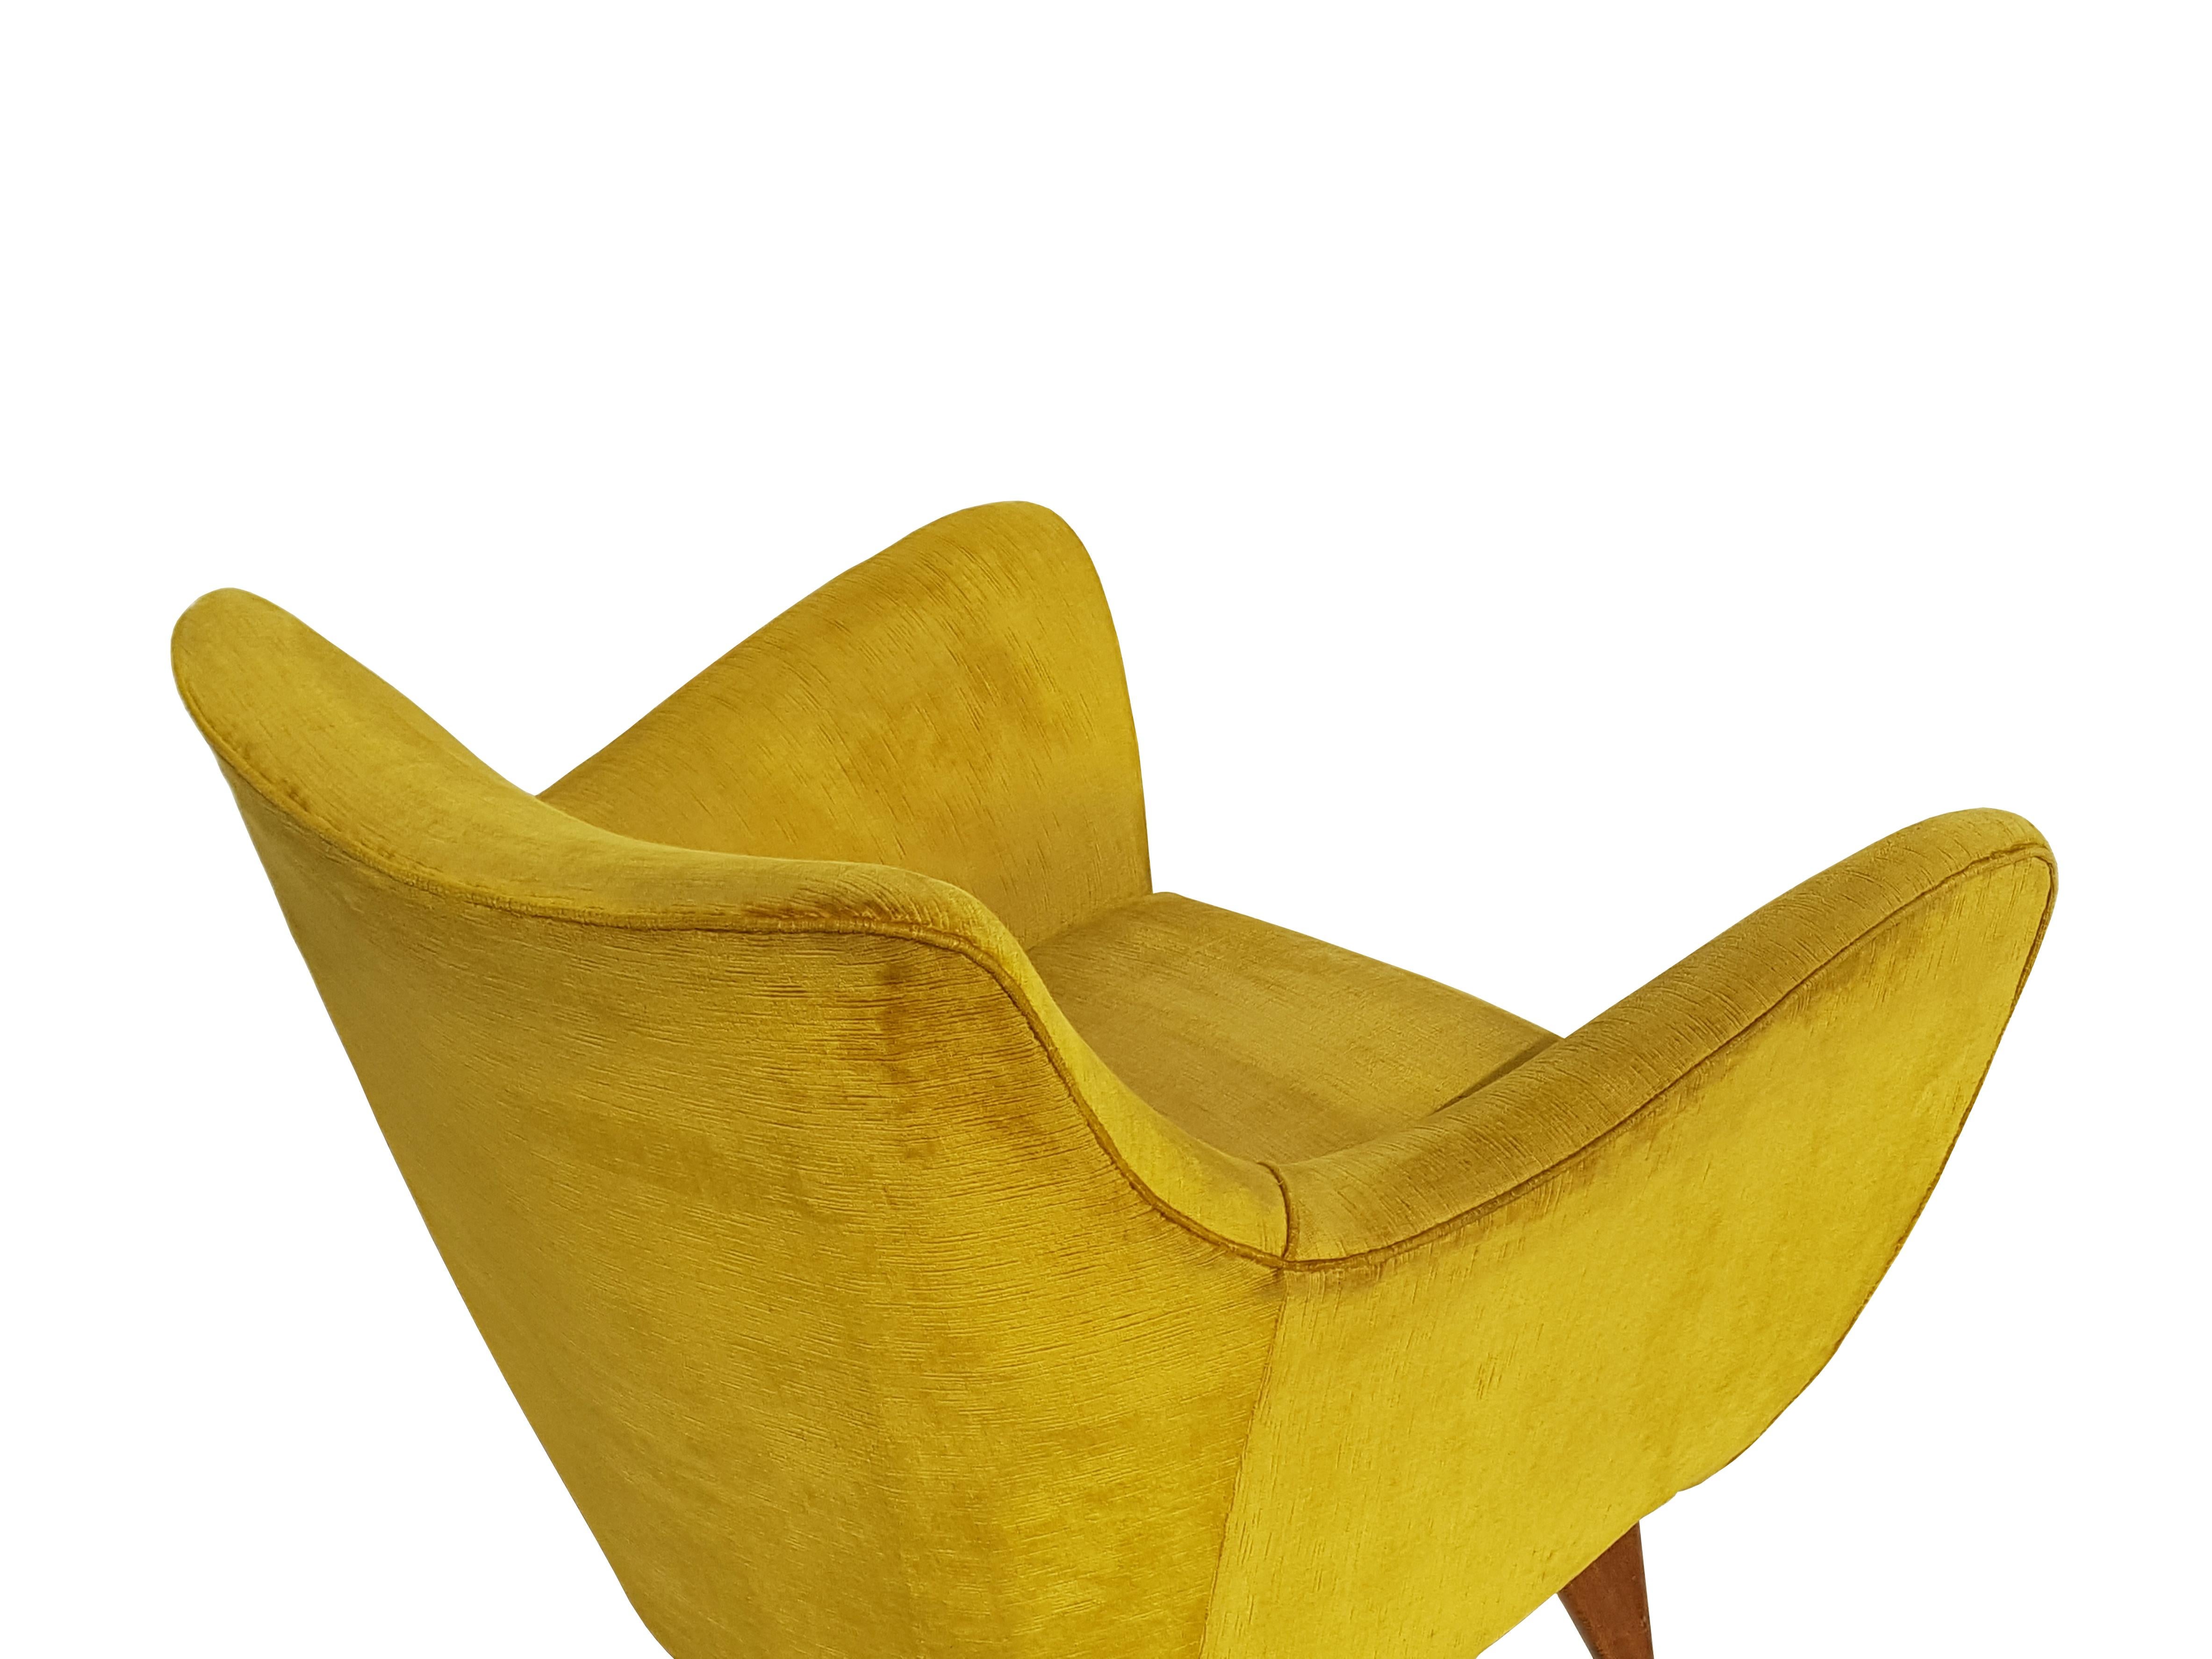 Pair of Ocra Yellow Velvet and Wood 1950s Perla Armchair by G. Veronesi for ISA For Sale 4